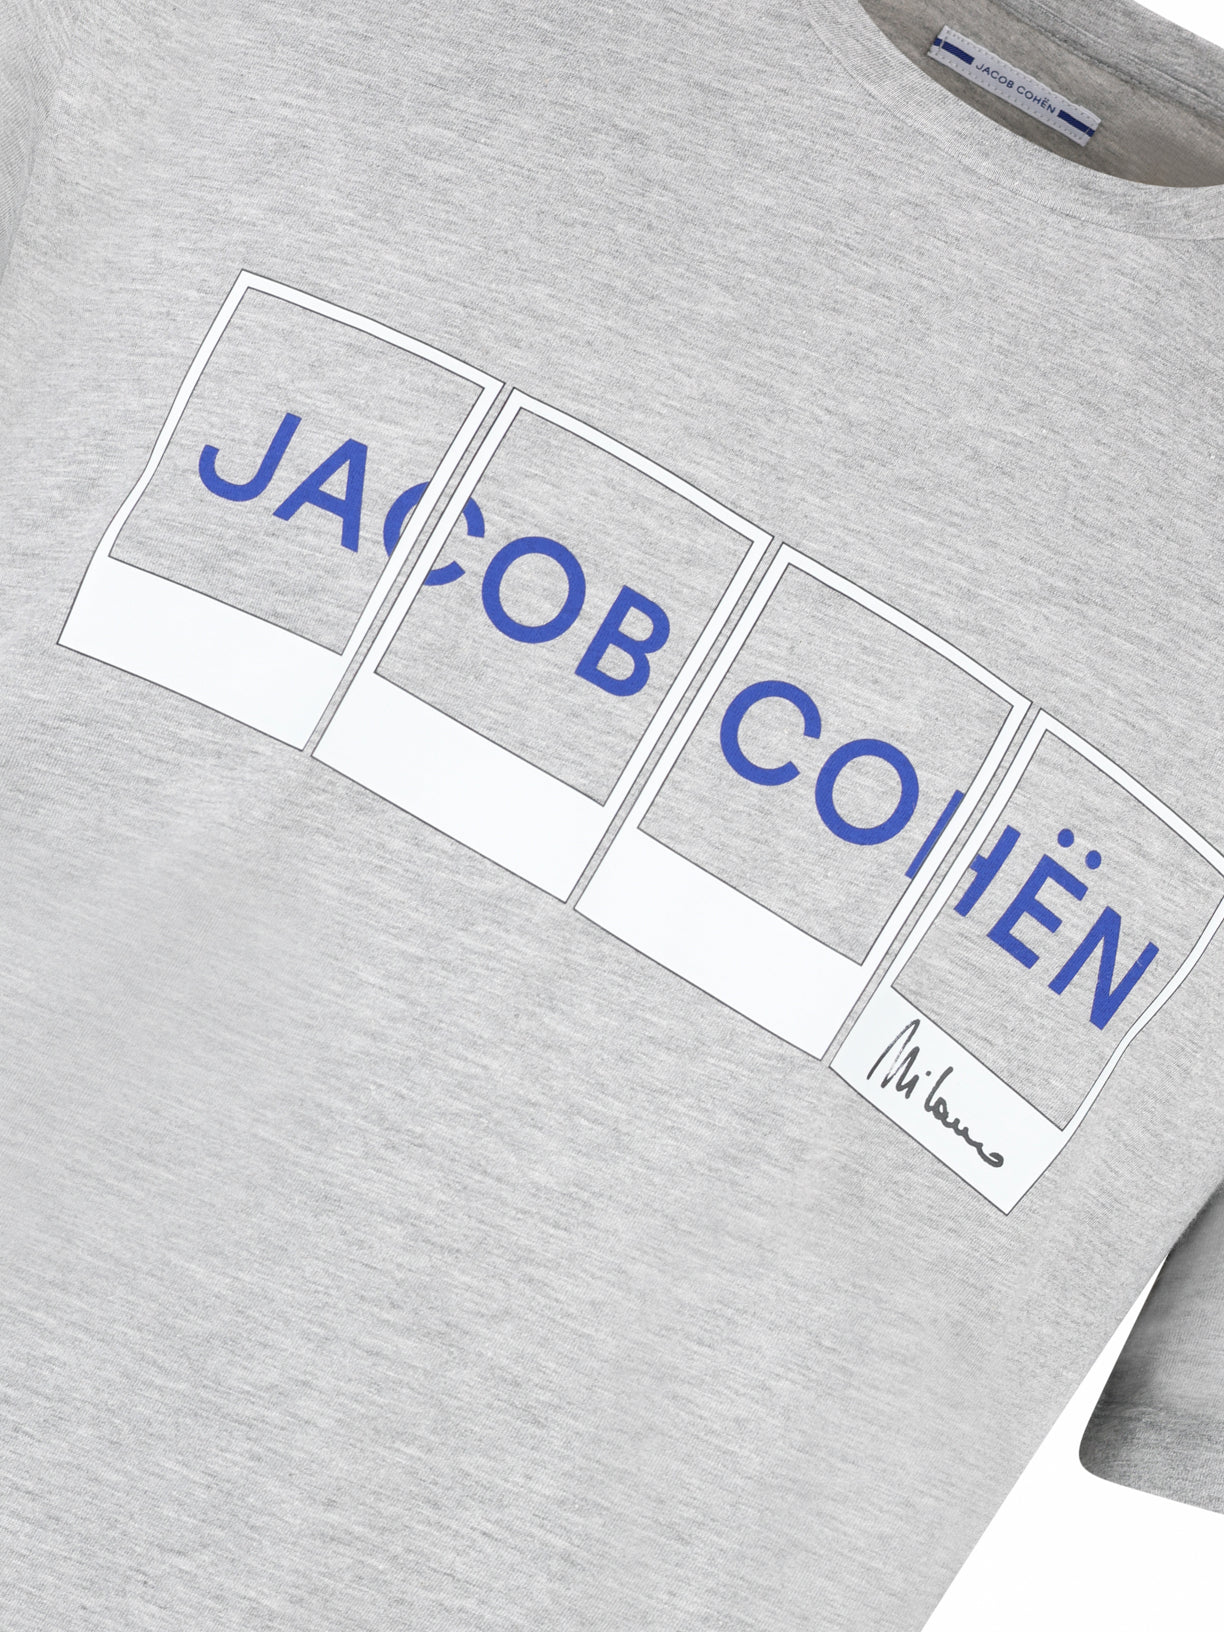 Load image into Gallery viewer, Jacob Cohen 4 Box Logo Tee Grey
